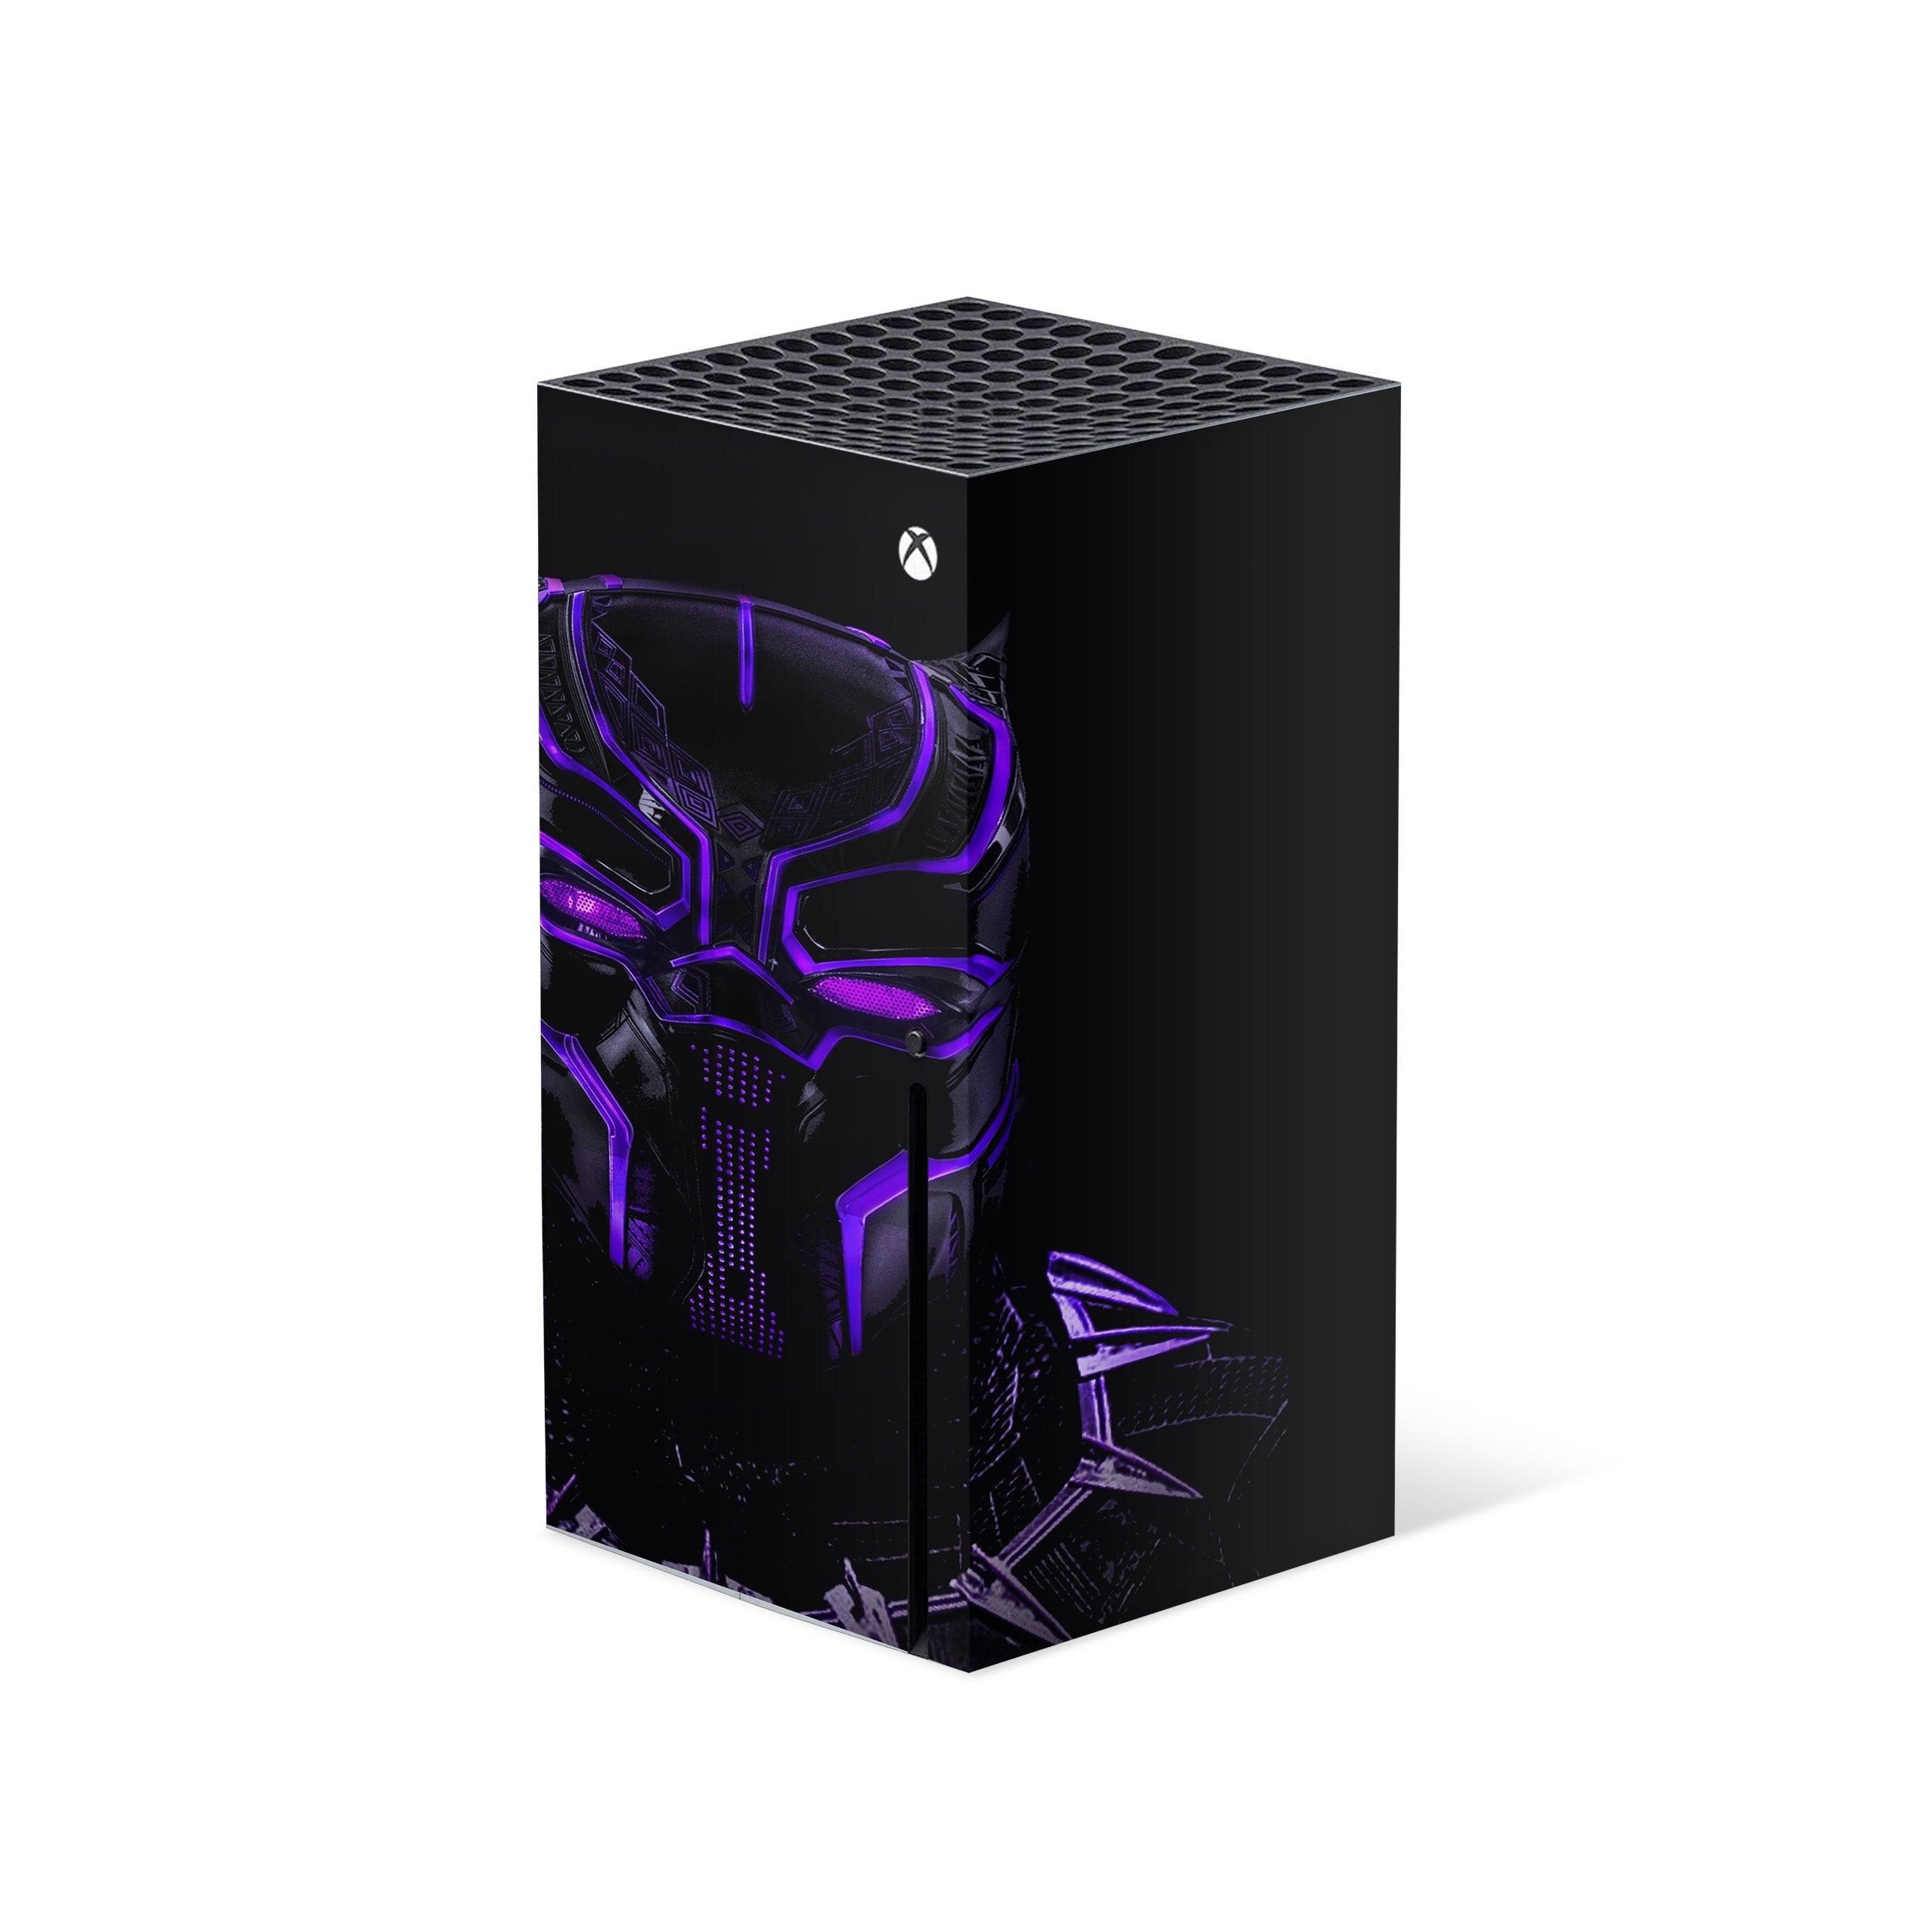 A video game skin featuring a Marvel Black Panther design for the Xbox Series X.